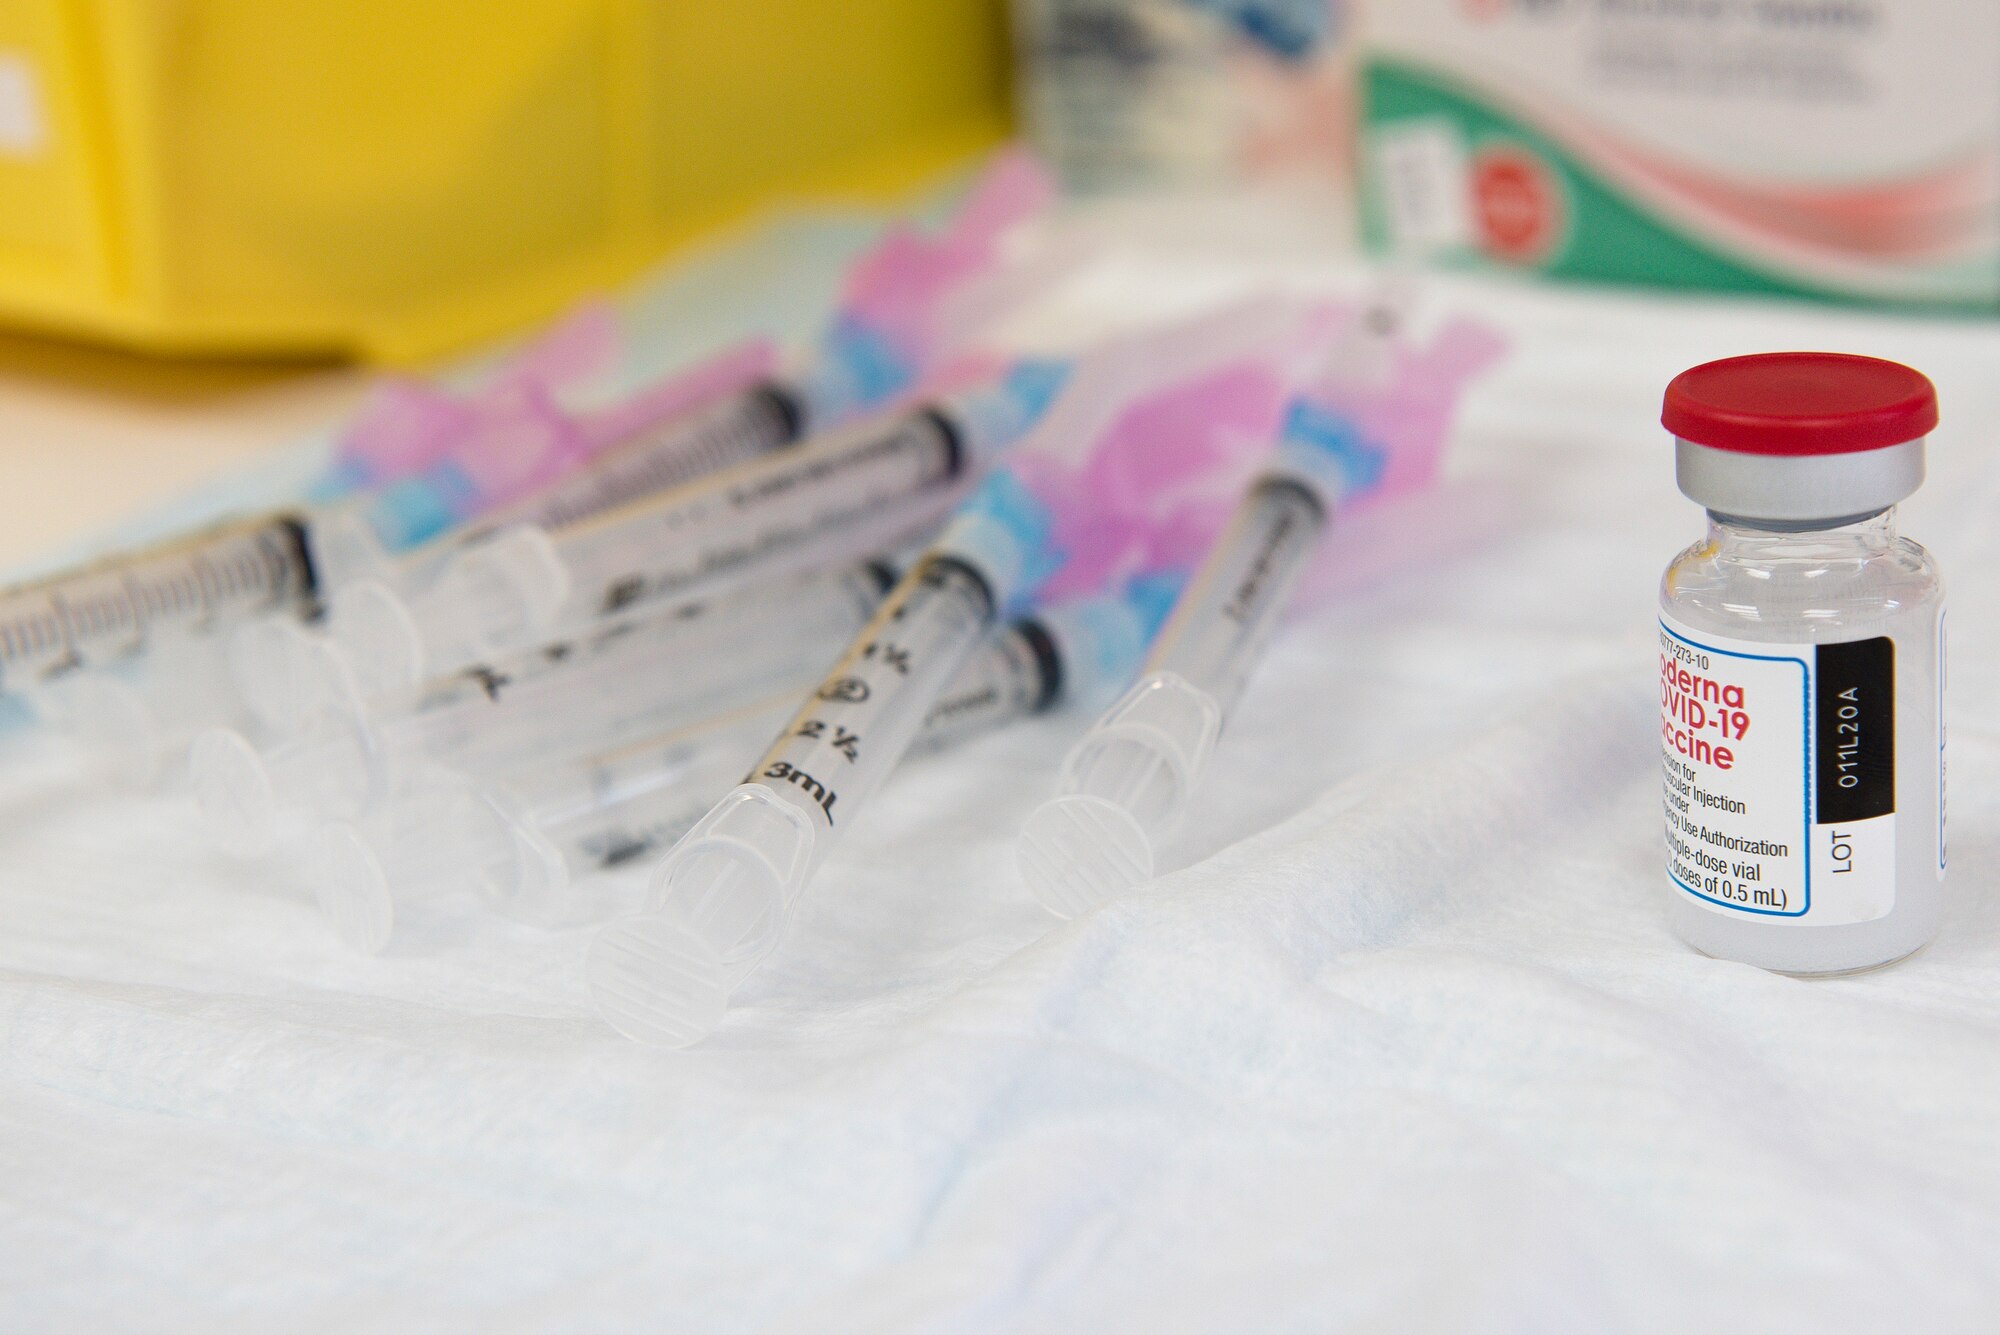 The COVID-19 vaccine and syringes lay on a table at the vaccination line at Cannon Air Force Base, N.M., Jan. 7, 2021. The vaccine distribution was handled by multiple members of the 27 SOMDG to ensure it was safely and properly delivered. (U.S. Air Force photo by Senior Airman Vernon R. Walter III)